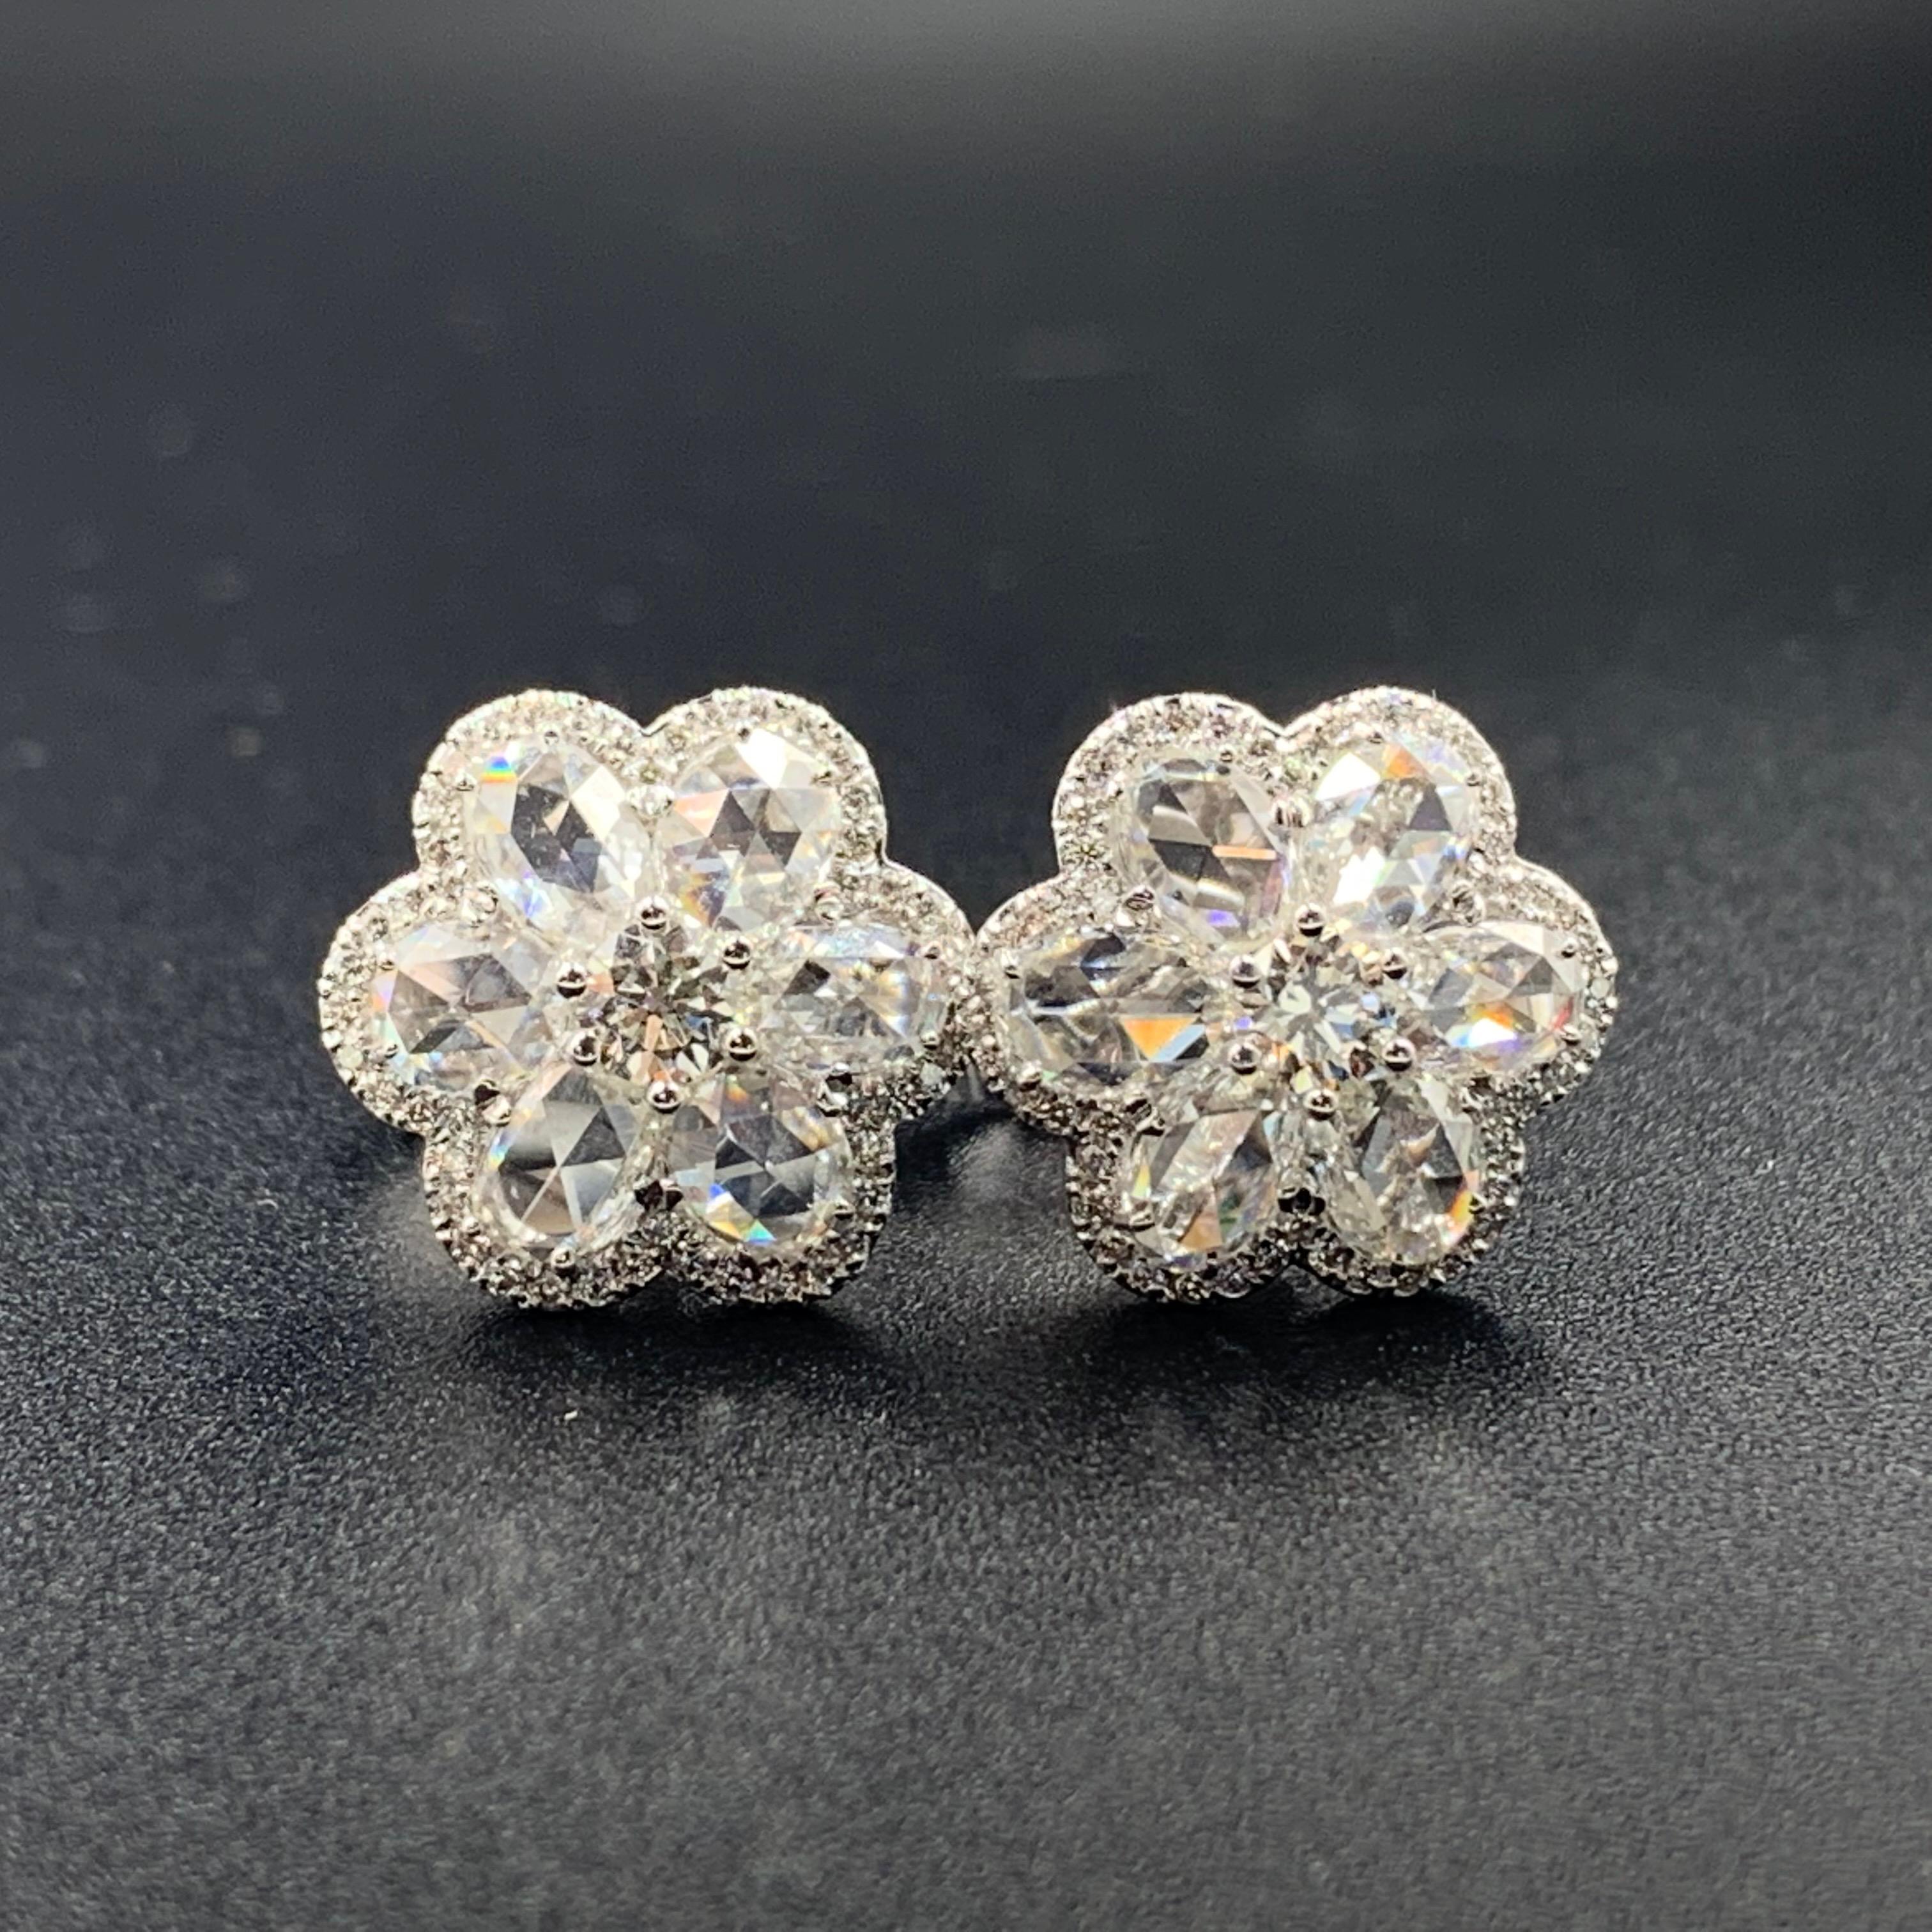 A WhiteRose collection top seller, the Venetian Earrings feature a 0.15 carat round brilliant diamond centered around six rose cut diamonds. The Venetian Earrings can be paired with our Venetian Pendant or Ring.

Rose Cut Diamonds
Shape Pear shaped